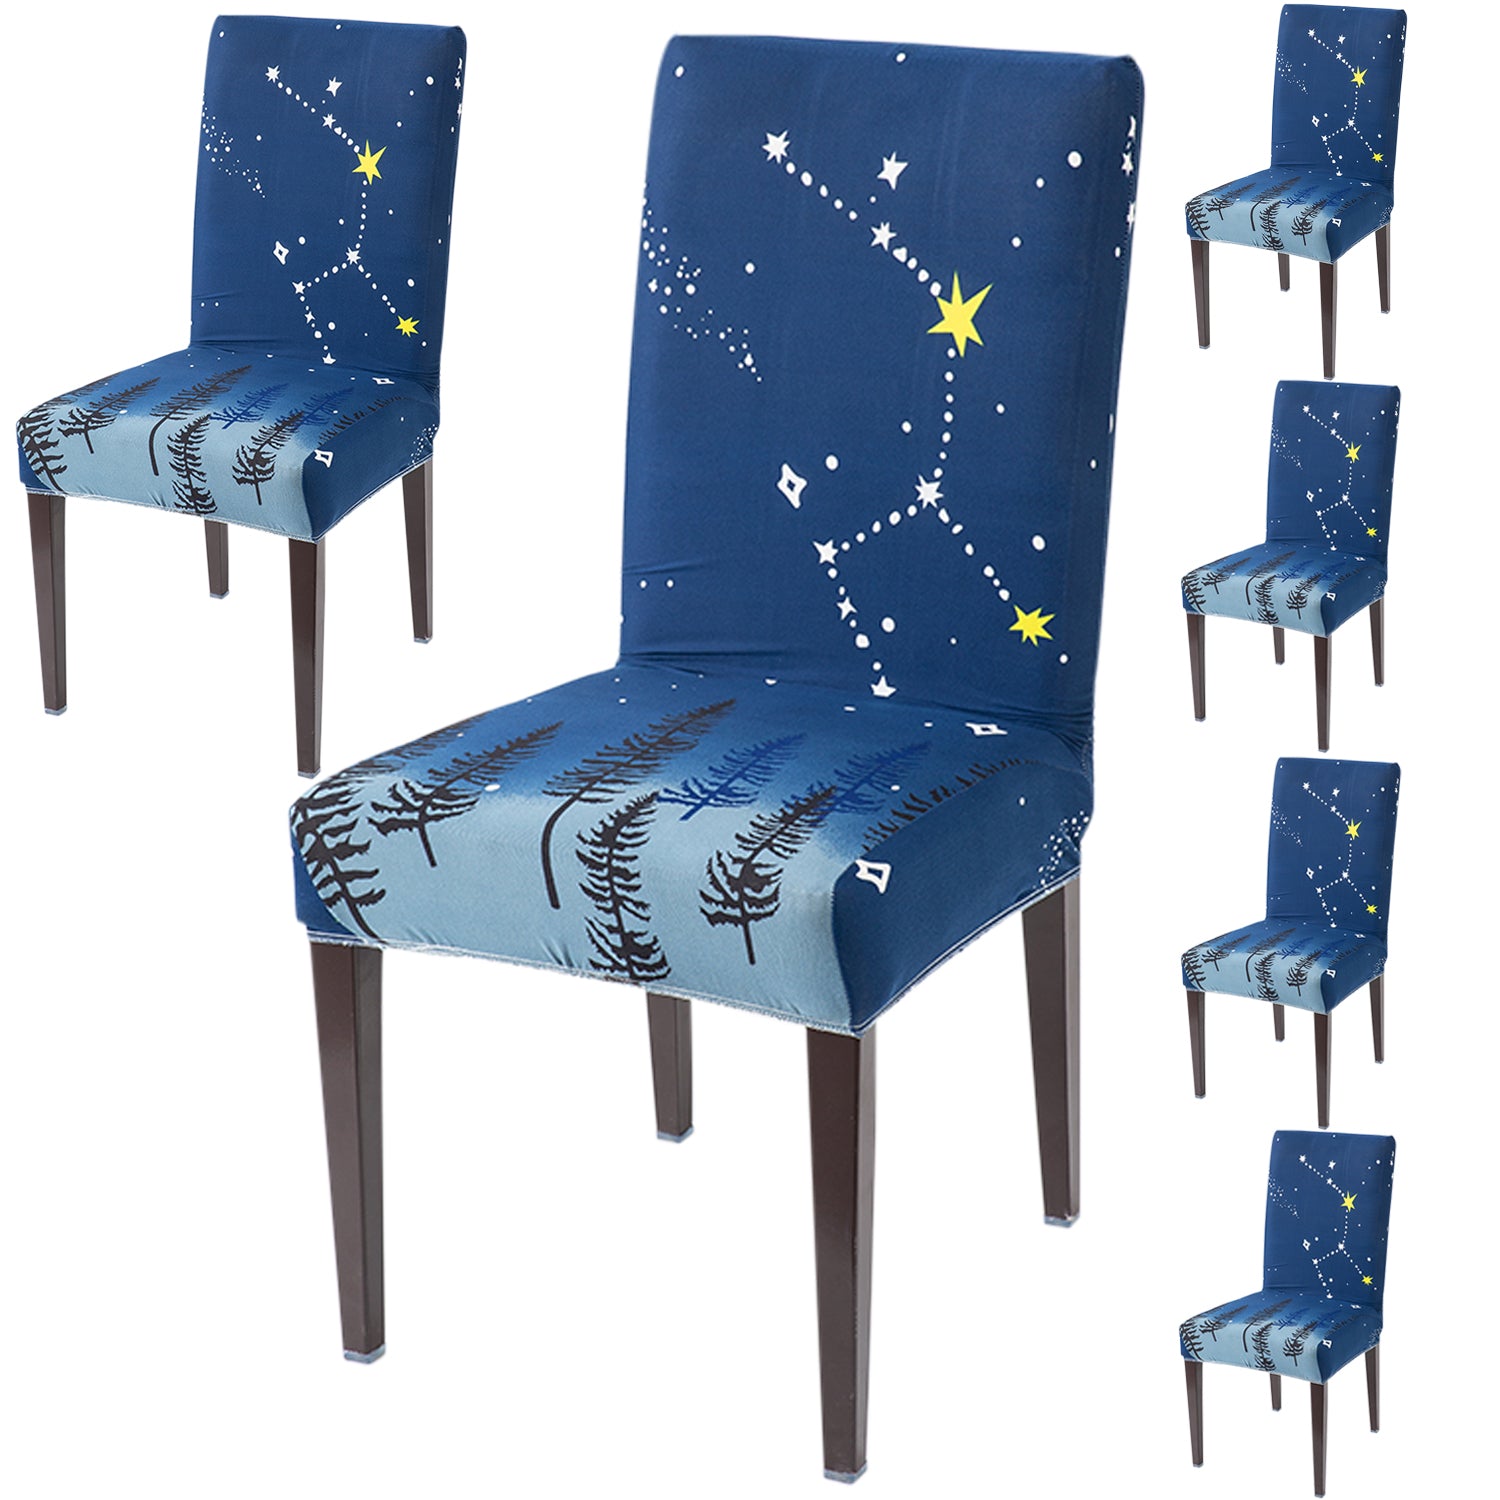 Elastic Stretchable Dining Chair Cover, Midnight Blue Star